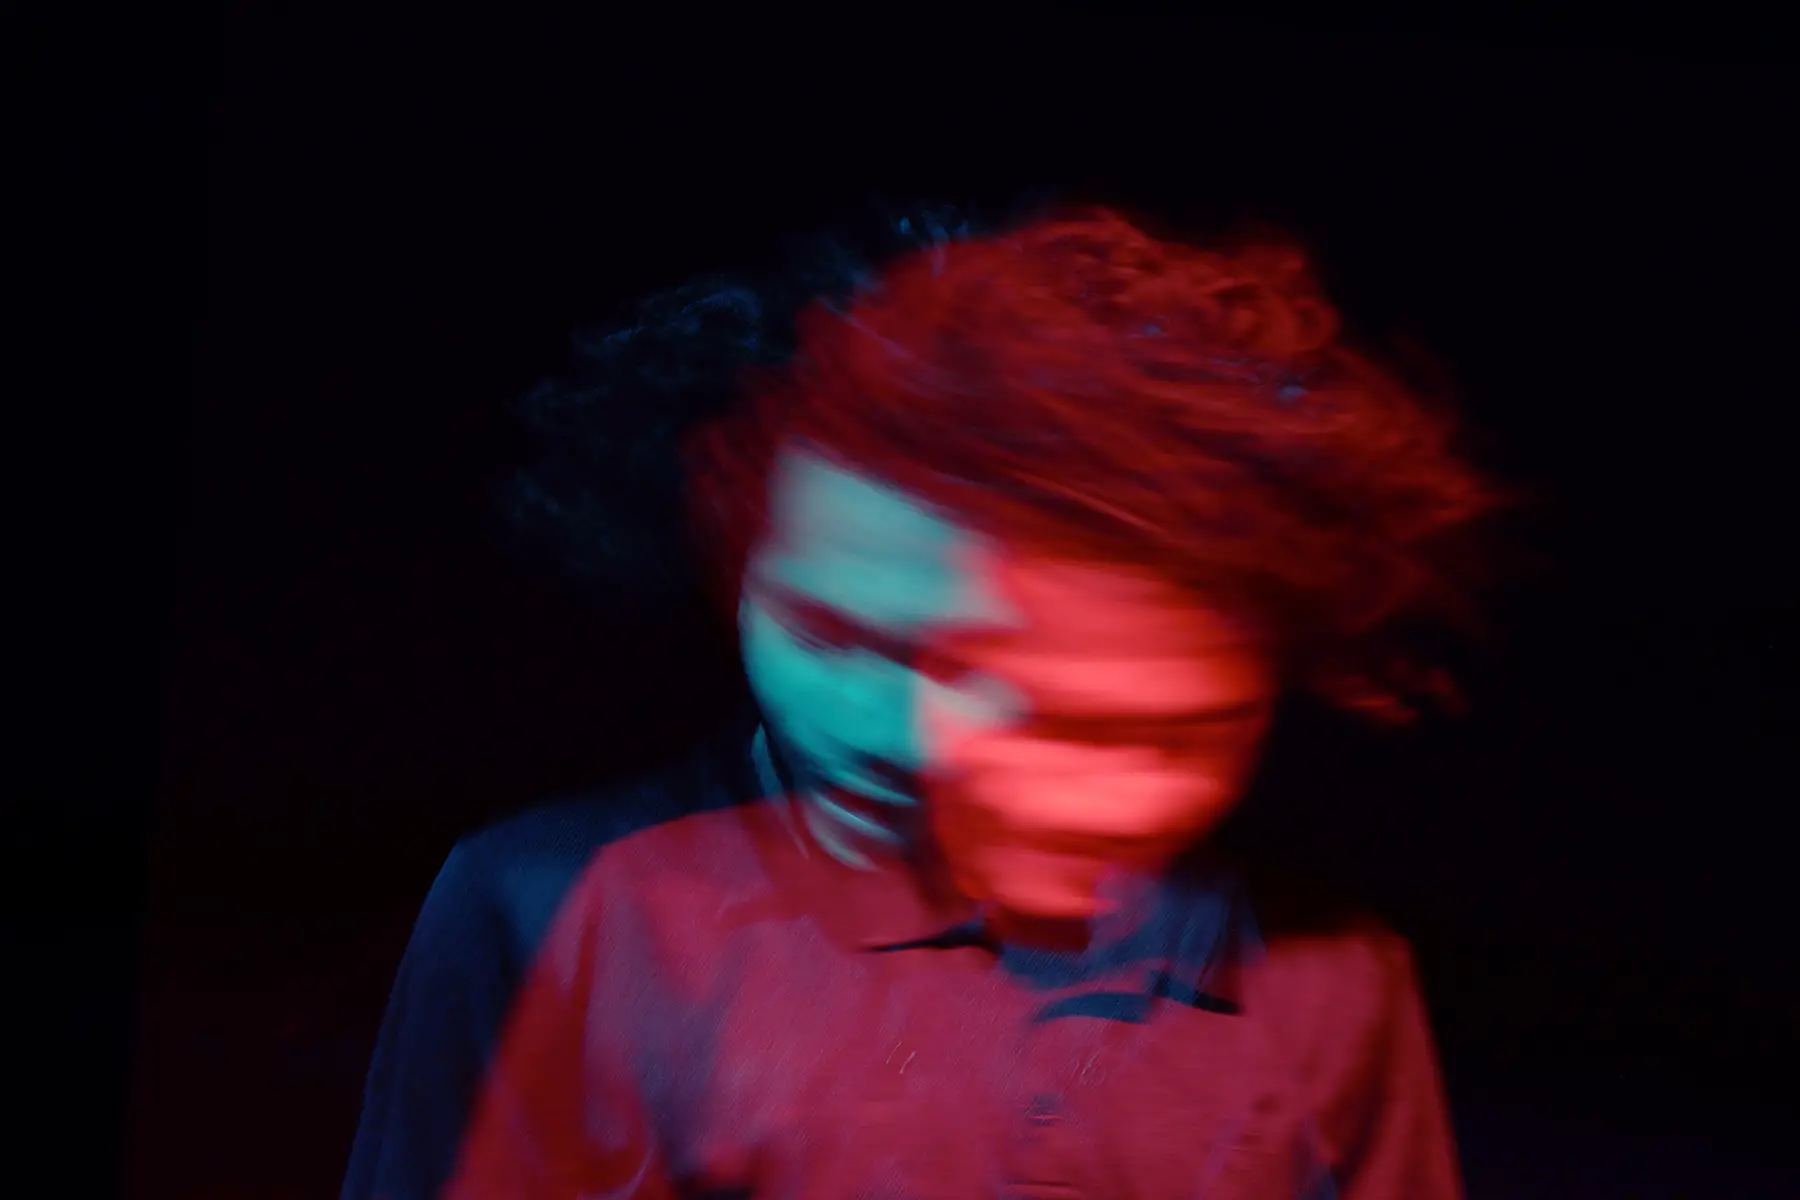 Double exposure of the head and shoulders of a person - blurry movement - black background